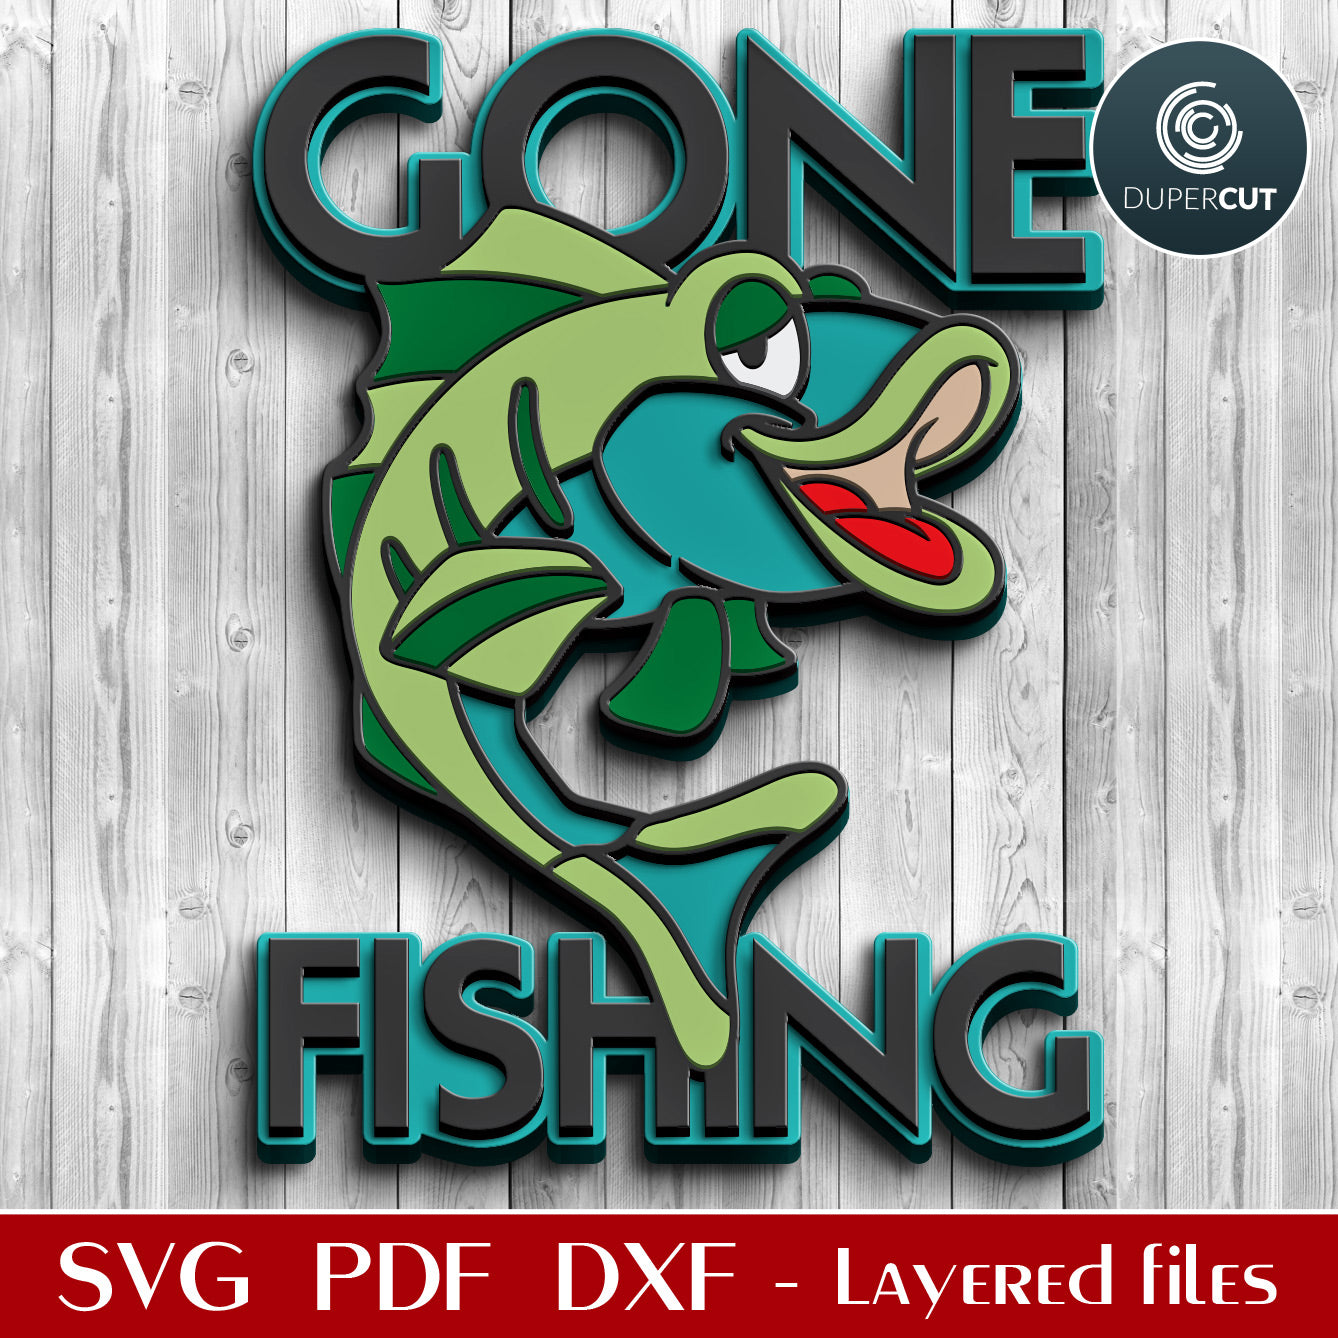 Fishing welcome sign for cottage decoration - GONE FISHING  - SVG DXF layered files for laser cutting with Glowforge, X-tool, Cricut, CNC plasma machines, scroll saw pattern by www.DuperCut.com